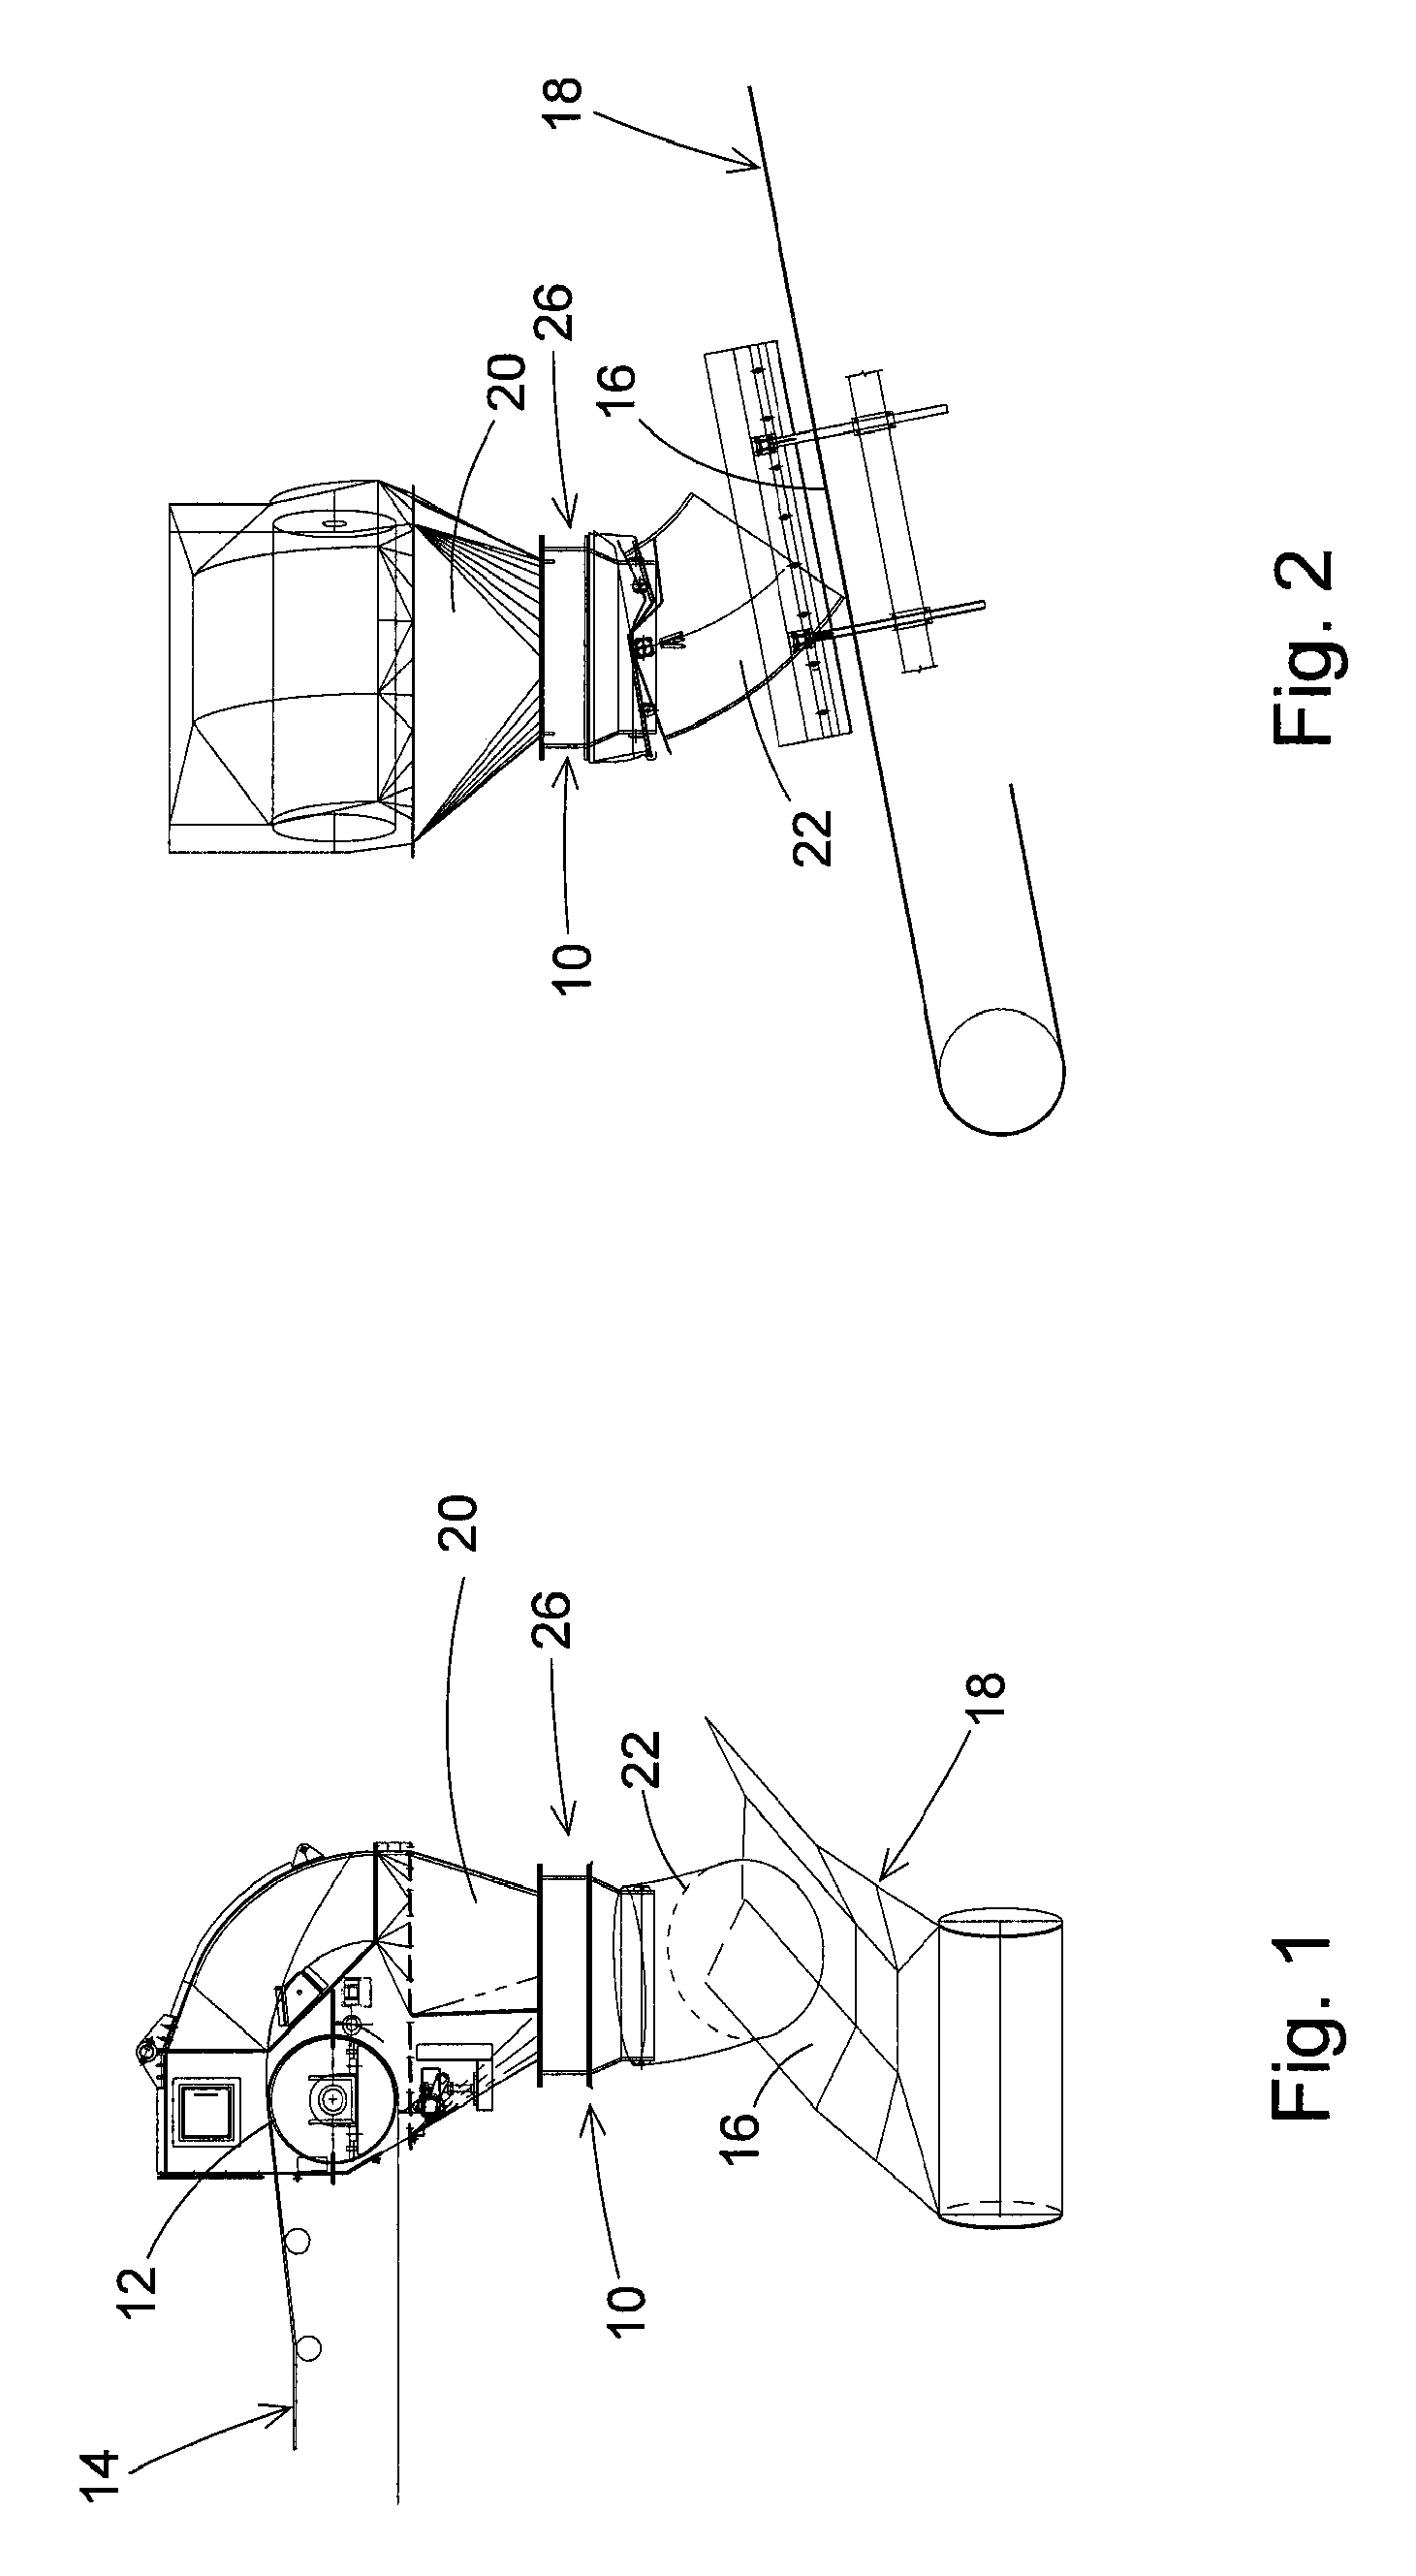 Adjustable aperture apparatus that retains dust from bulk material directed through the apparatus